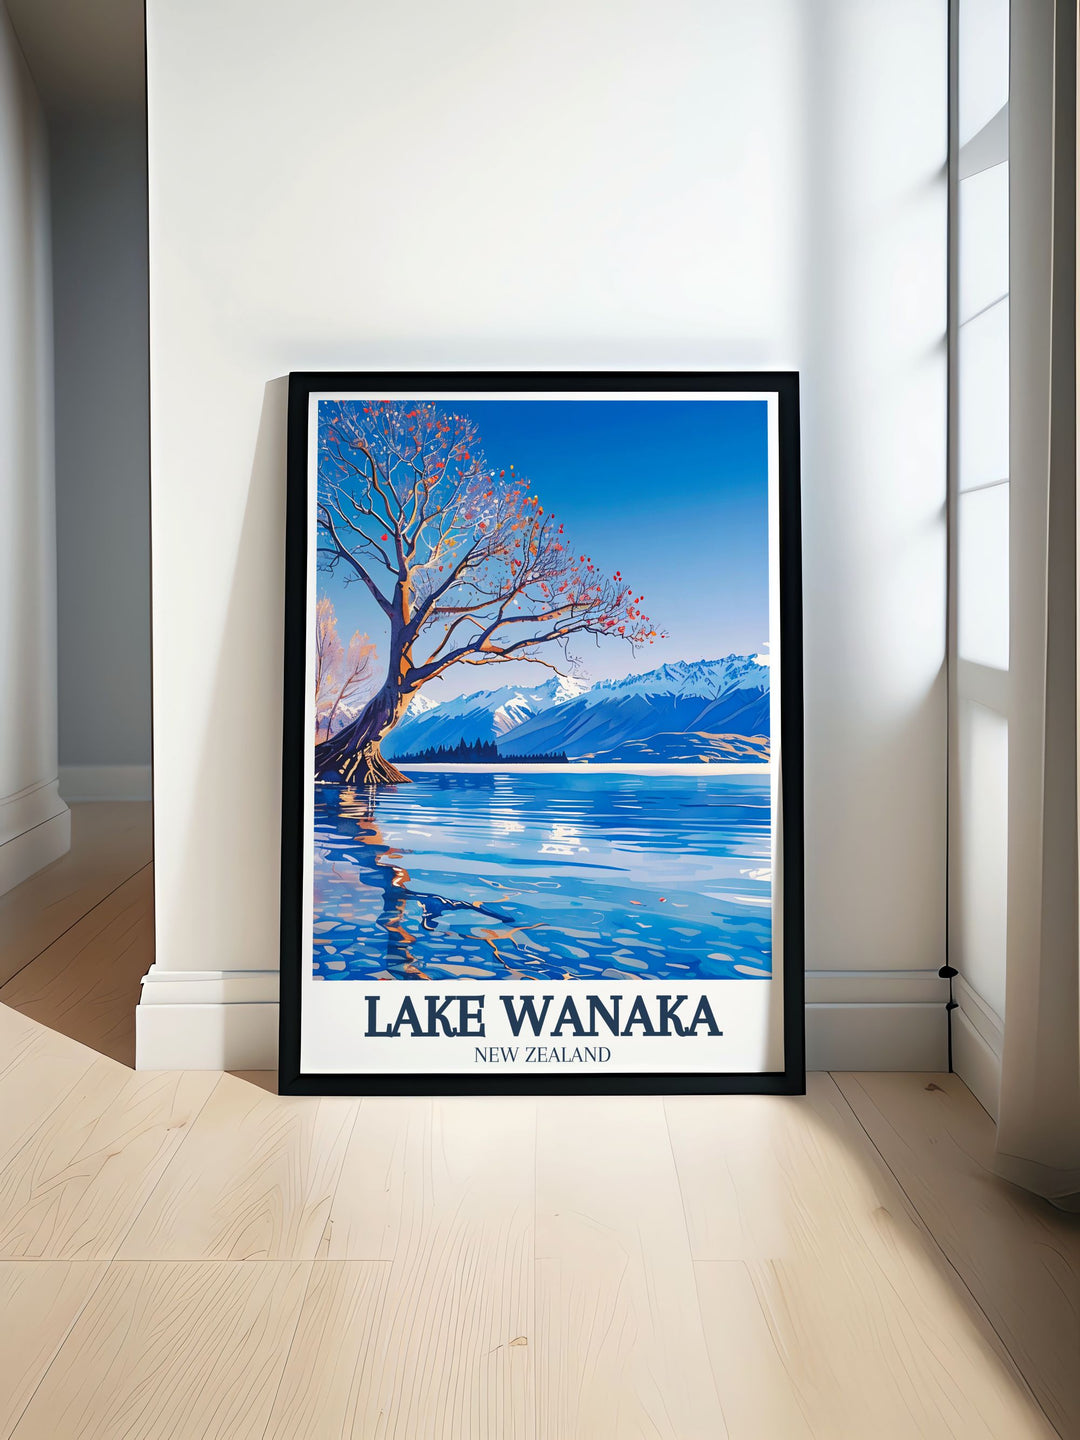 Beautiful New Zealand print featuring the iconic lake wanaka tree in Mount Aspiring National Park Perfect for adding a touch of nature to your home decor and creating a serene atmosphere with its vibrant colors and detailed artwork